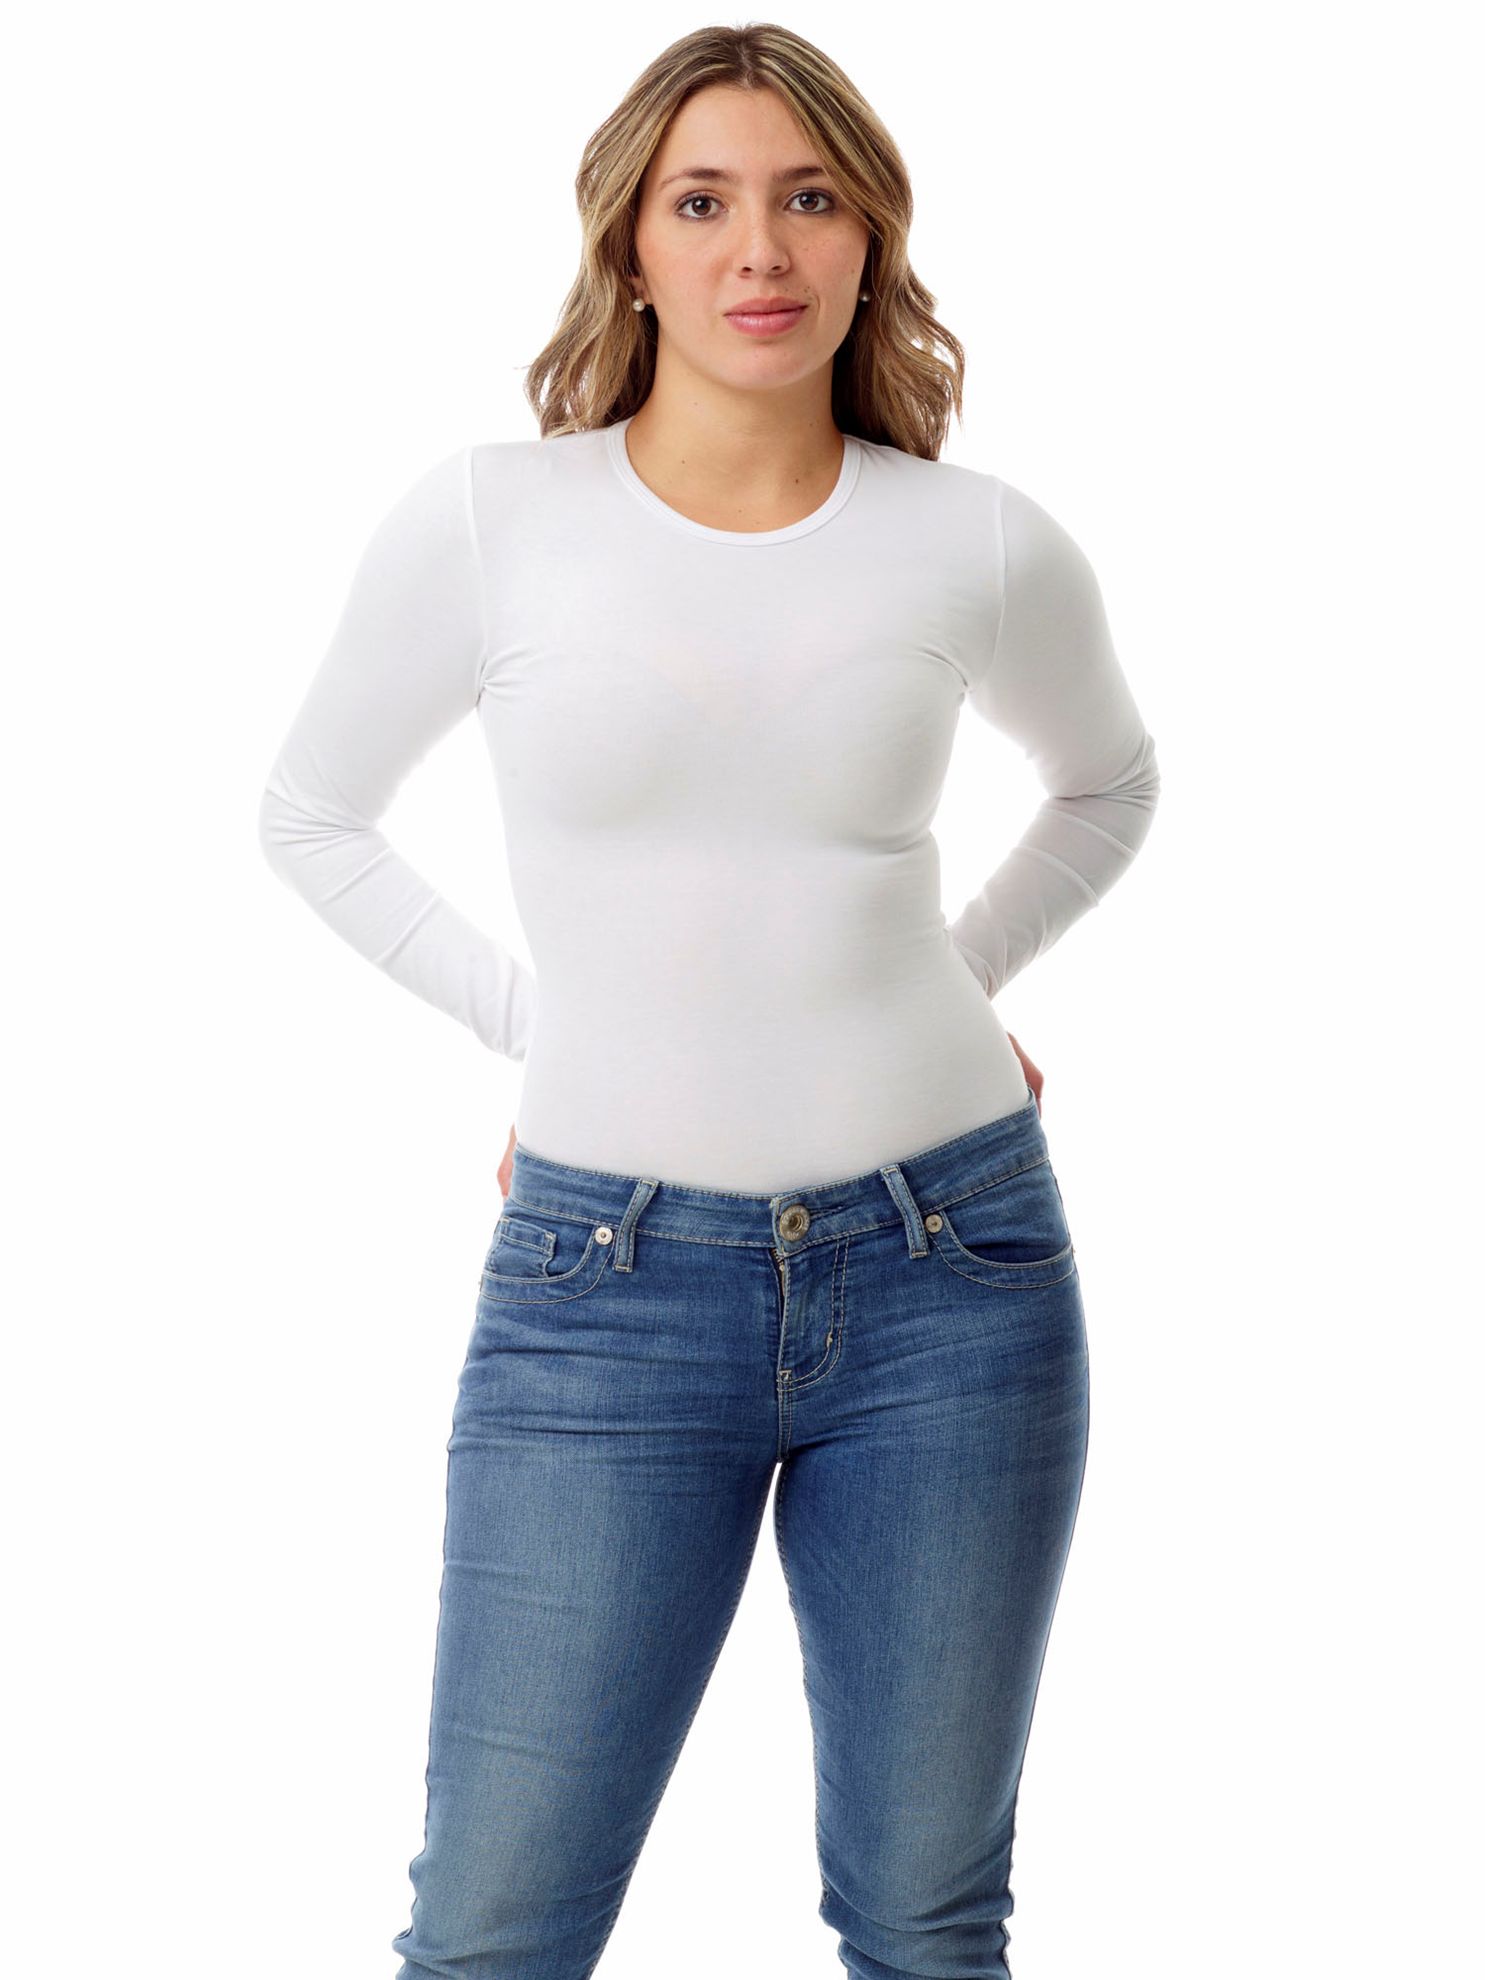 https://www.underworks.com/images/thumbs/0000280_womens-ultra-light-cotton-spandex-compression-crew-neck-top-long-sleeves.jpeg